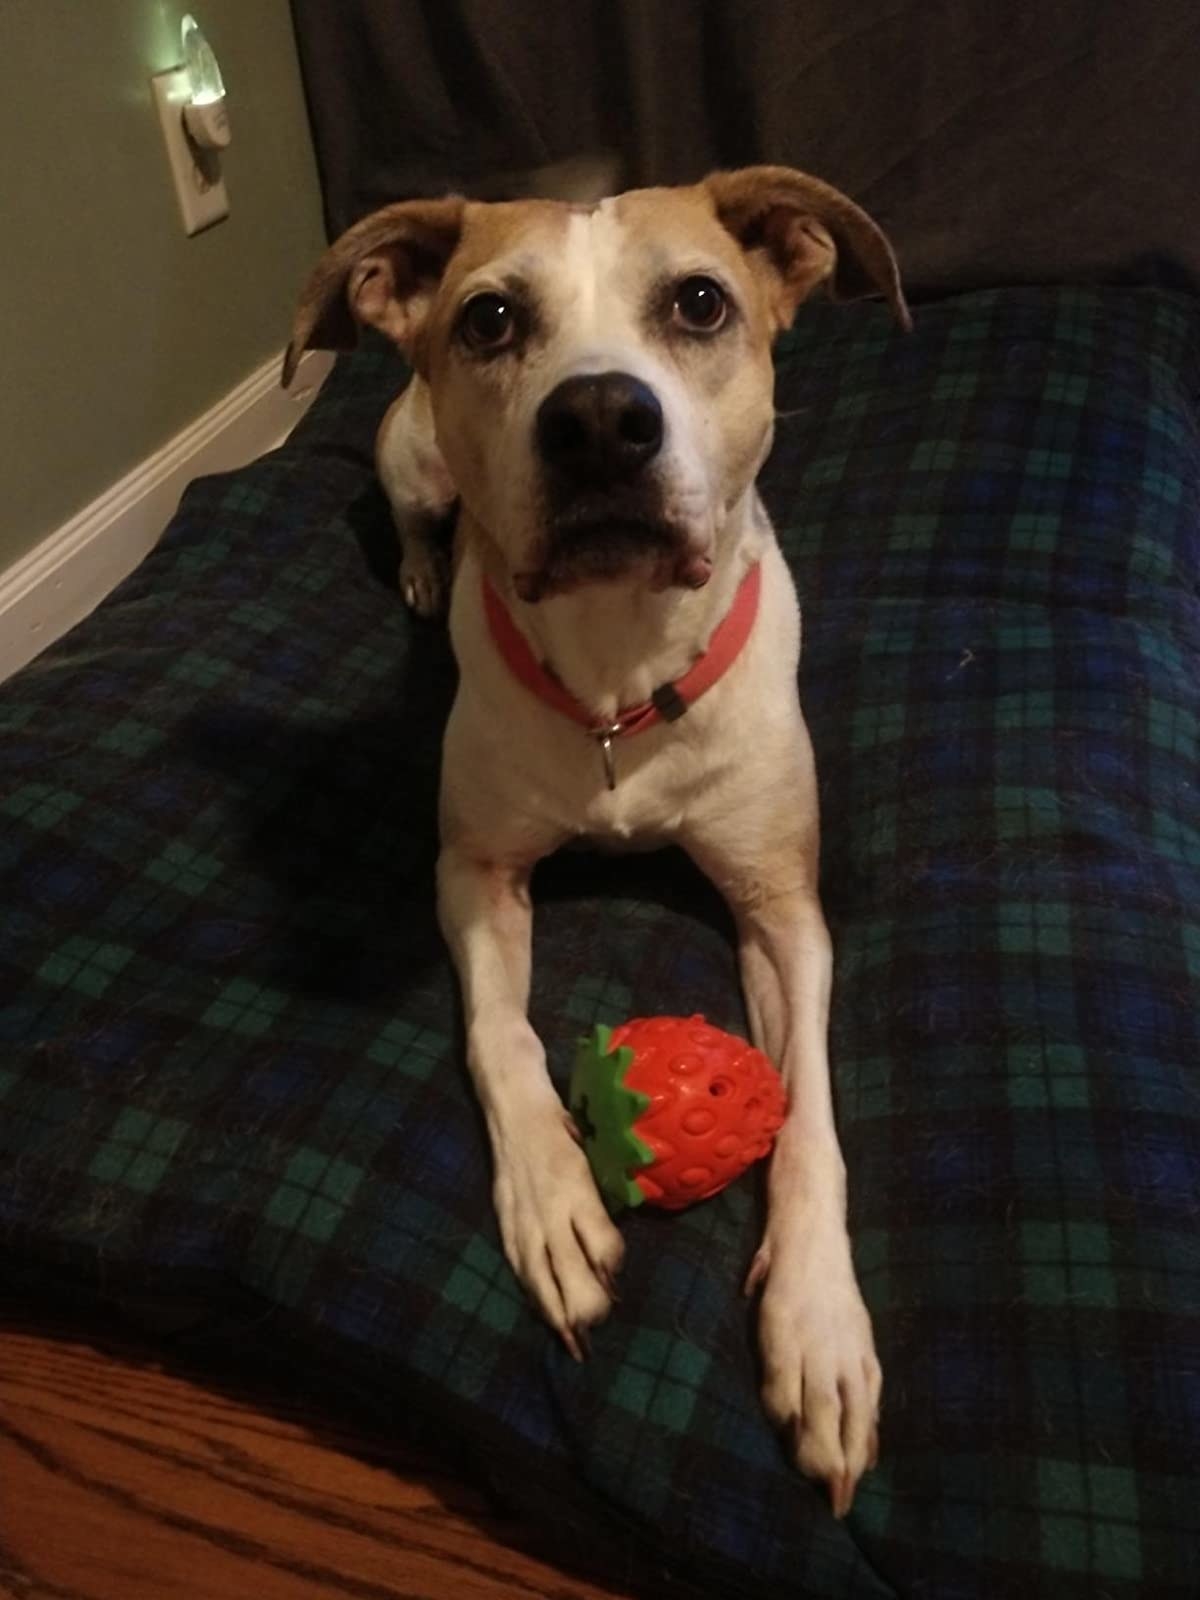 A dog holds the toy, which is shaped like a strawberry and is hollow so that it may hold and dispense treats